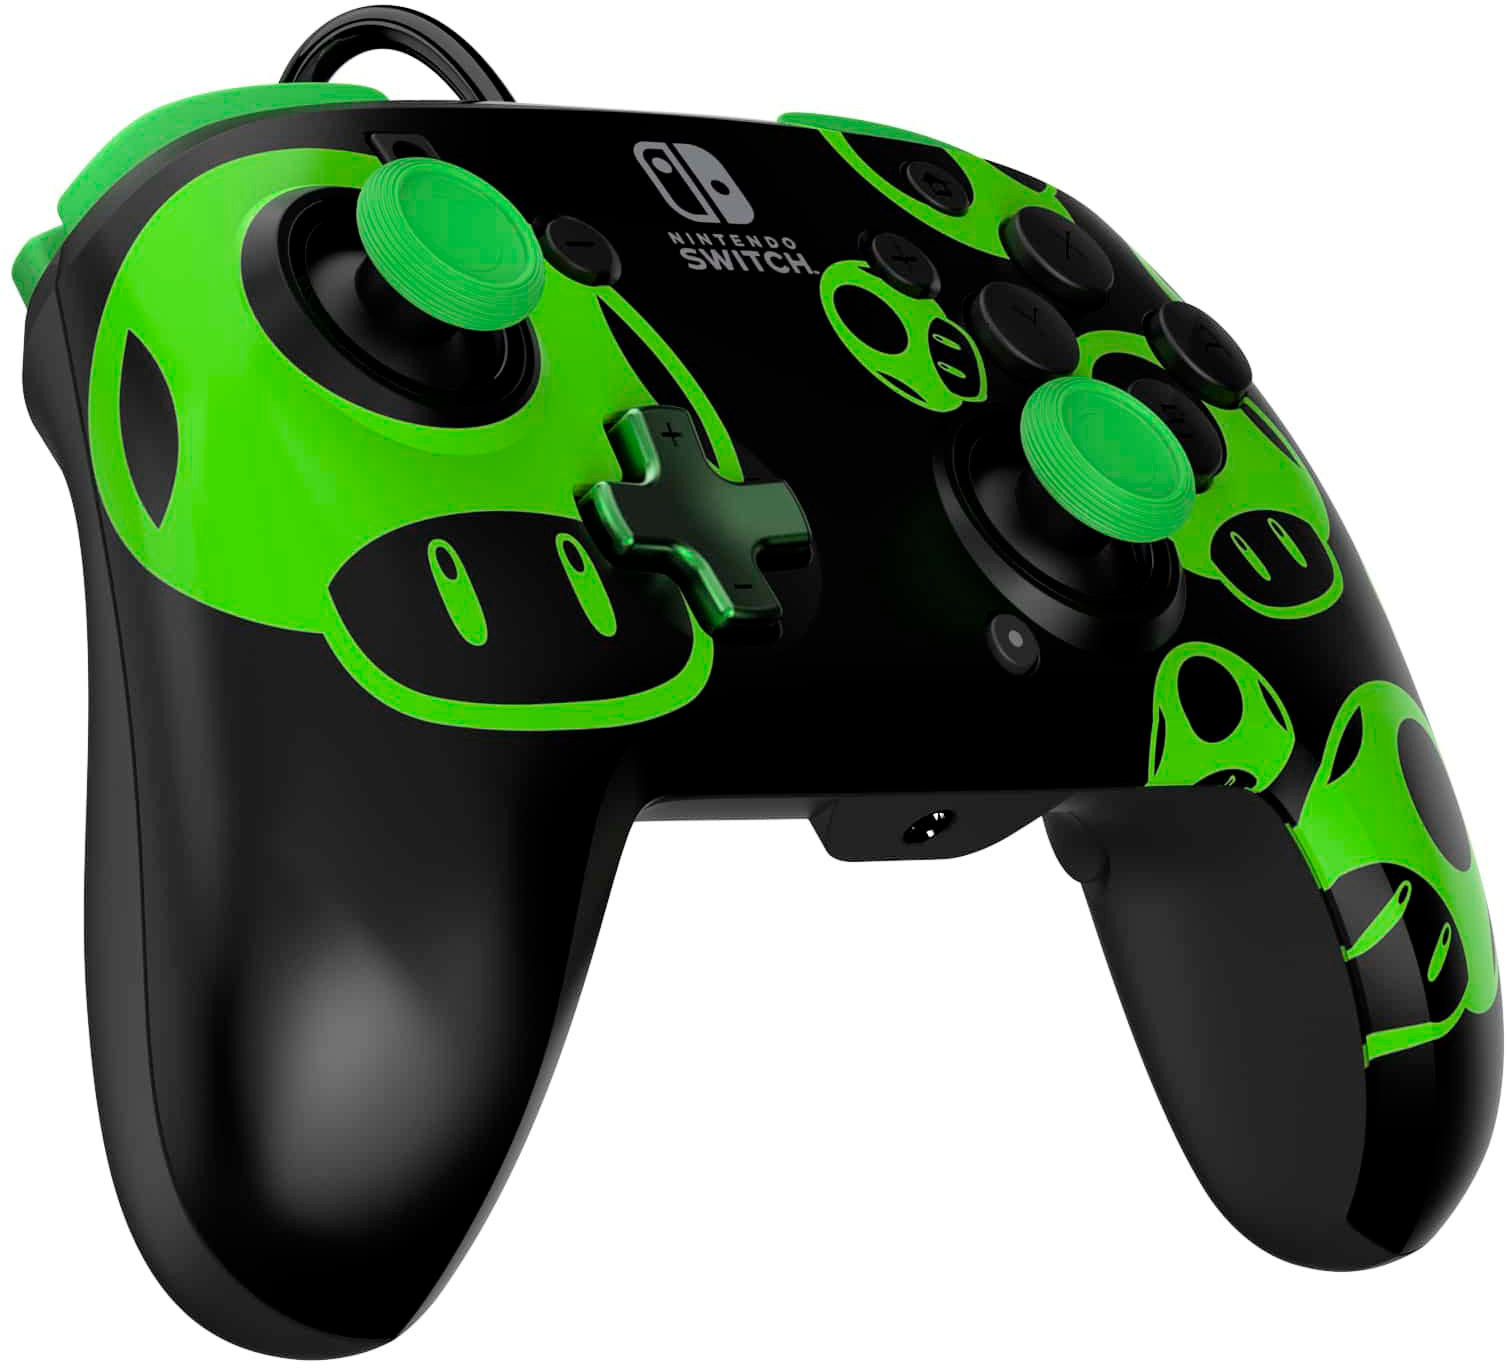 PDP Rematch Nintendo Switch Wired Pro Controller: Glow in the Dark